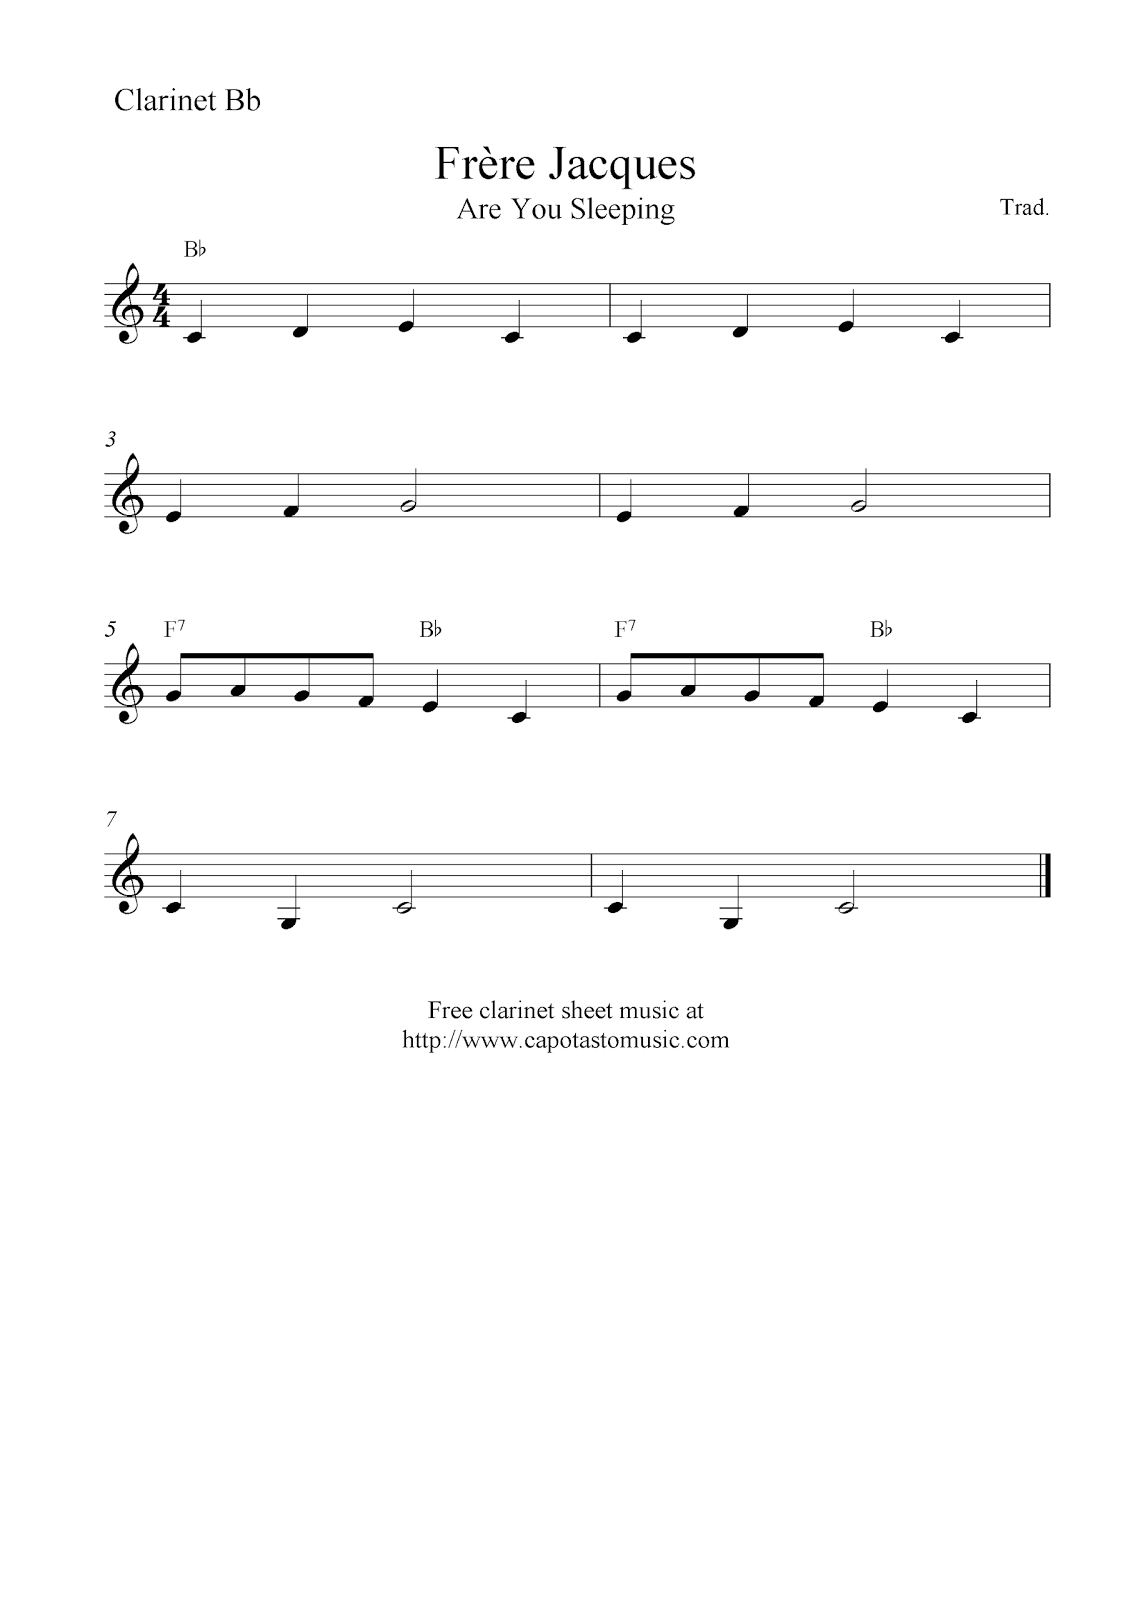 Frère Jacques (Are You Sleeping), Free Easy Clarinet Sheet Music Notes - Free Printable Clarinet Music